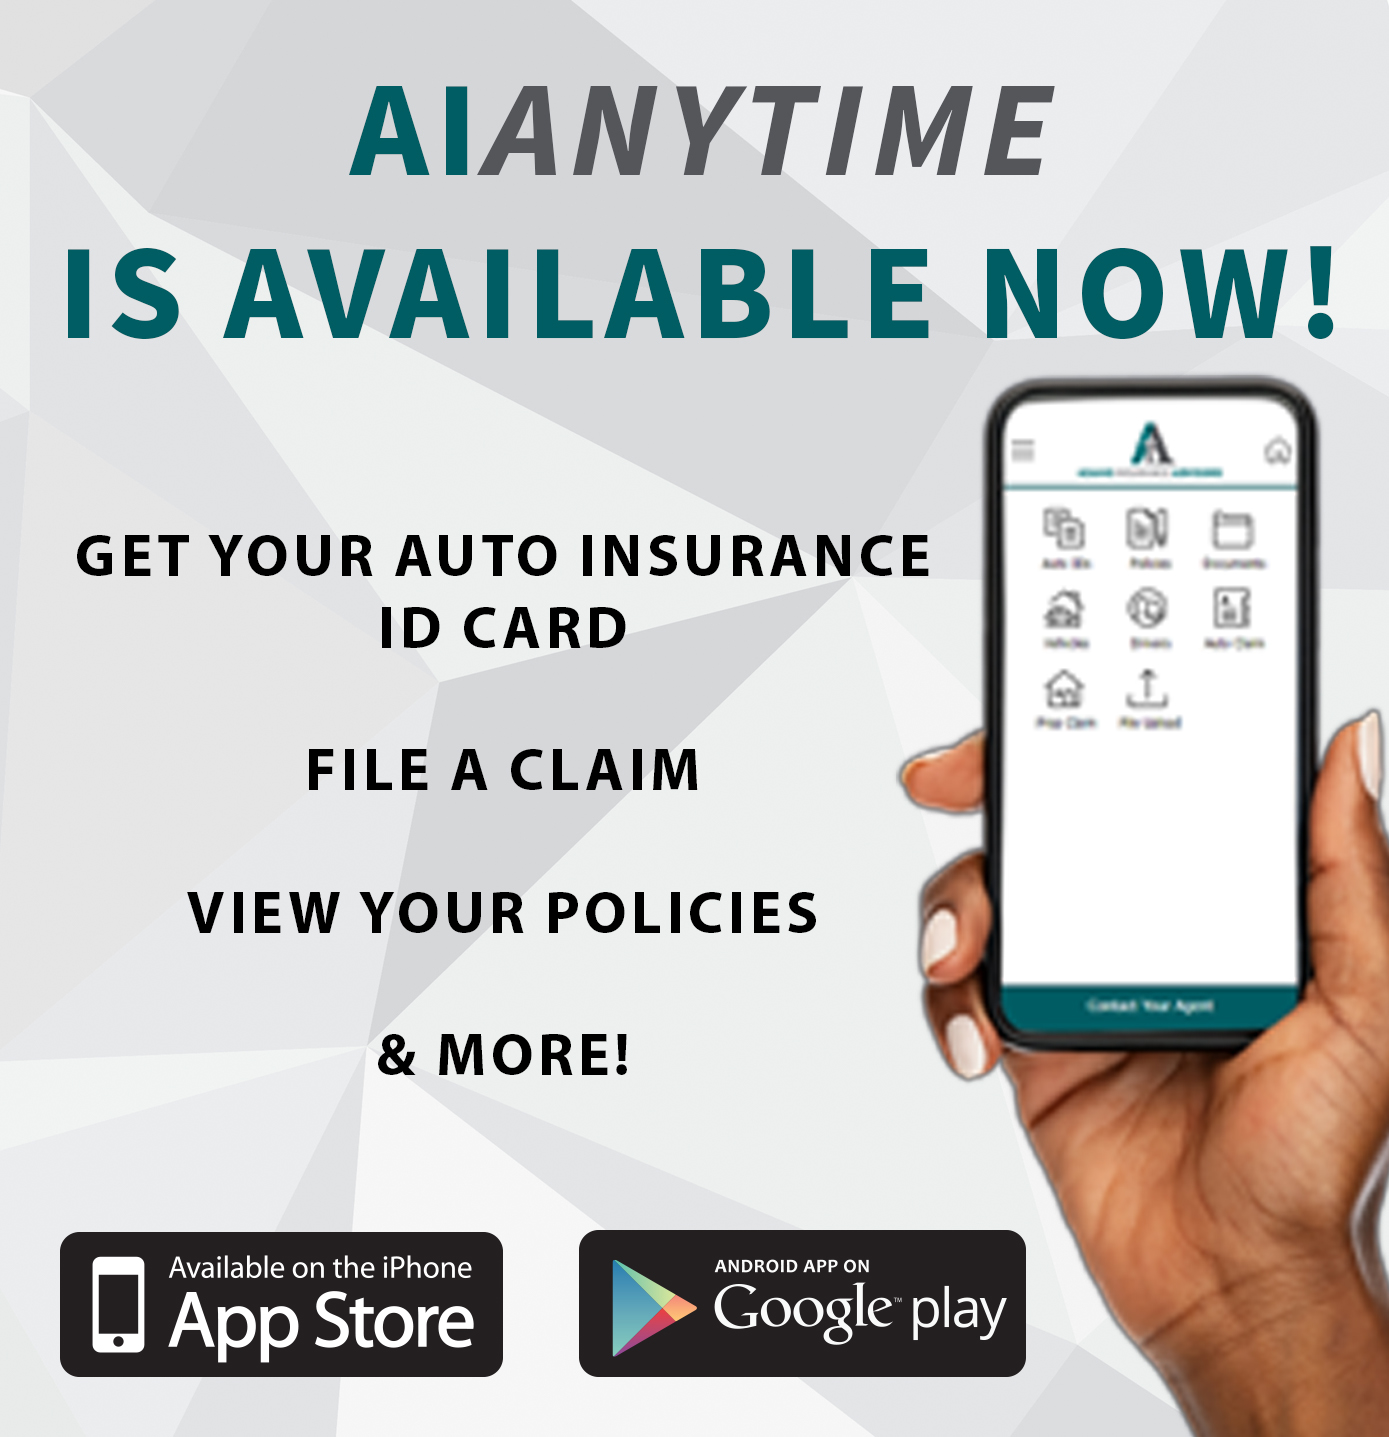 AIAnytime app available now